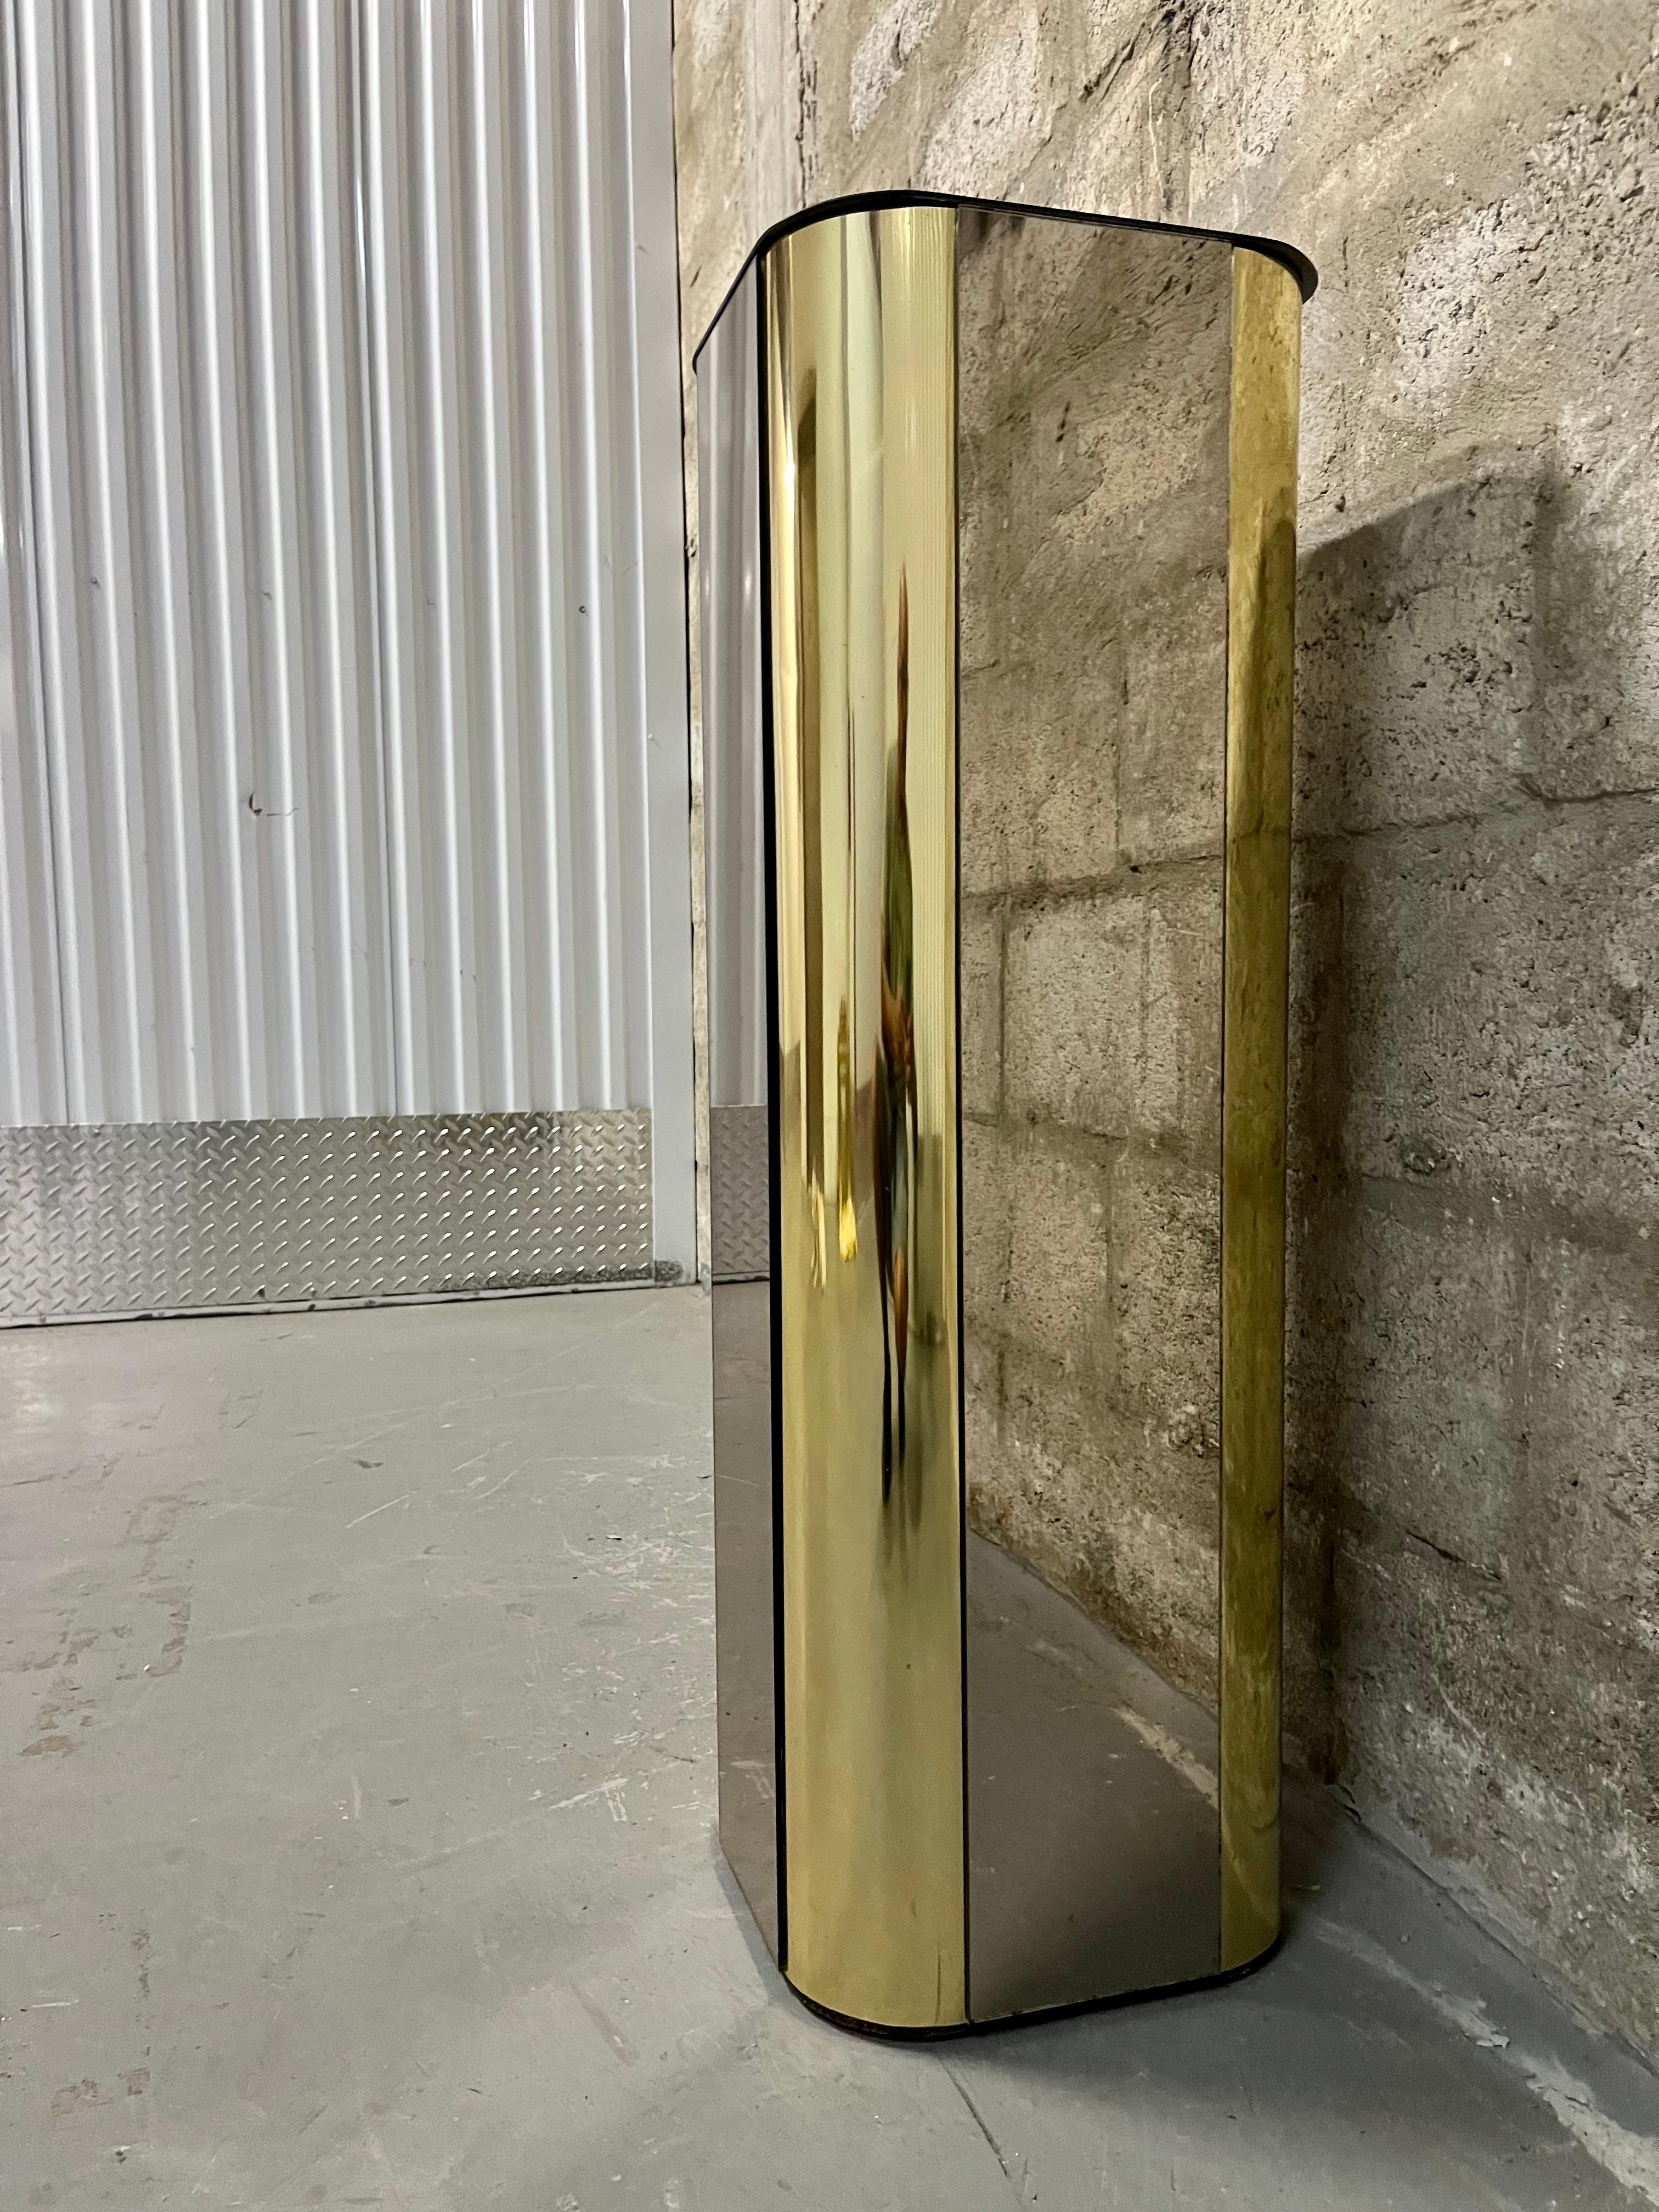 Vintage Hollywood Regency Brass and Smoked Mirror Pedestal in the Curtis Jere's Style. Circa 1970s 
Features a brass rounded edged with smoked mirror side panels and smoked mirror with rounded corners top. 
In good original condition with minor